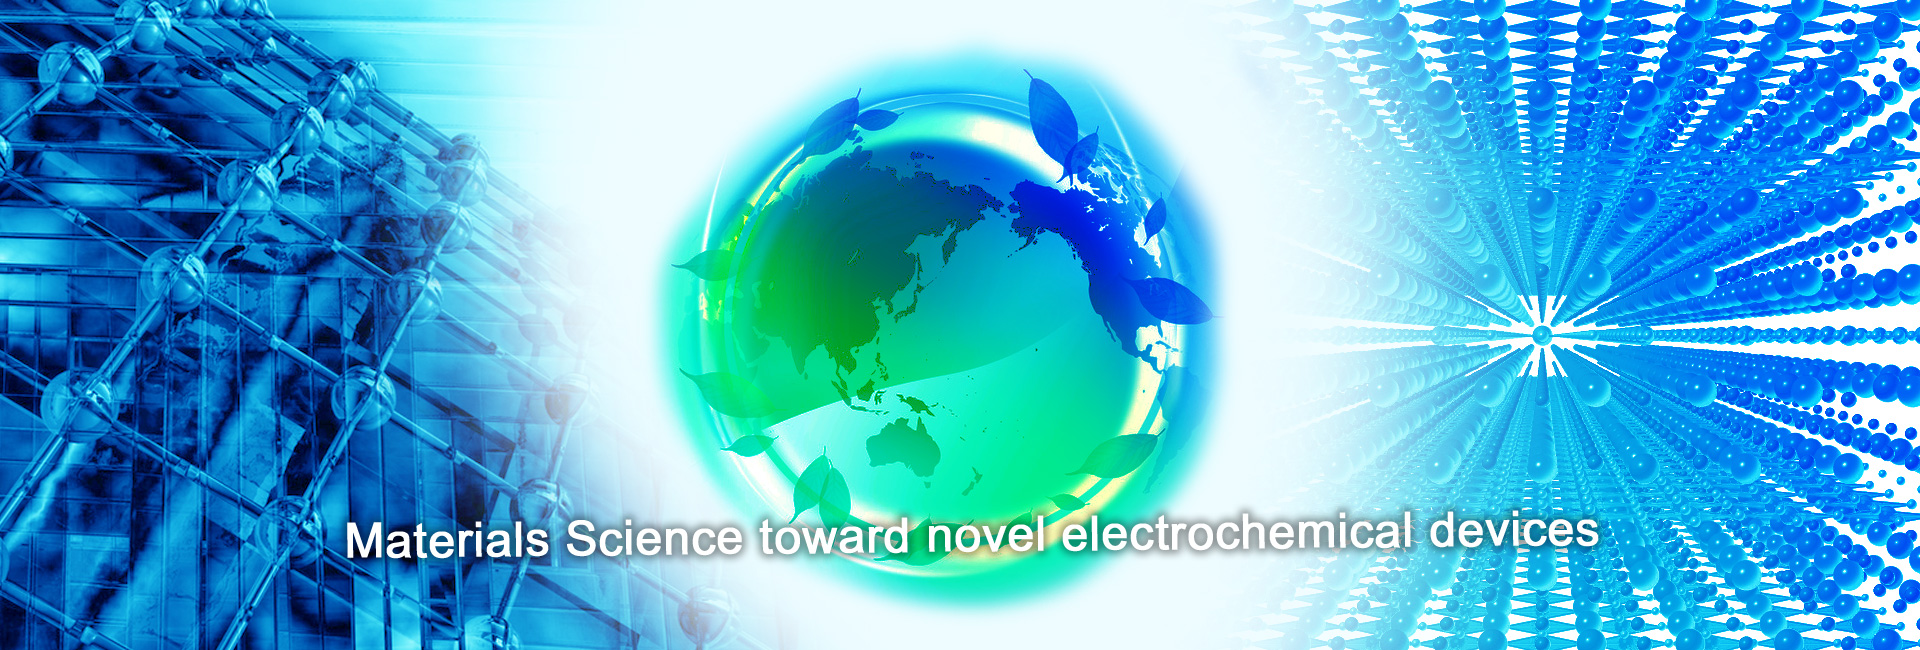 Materials Science toward novel electrochemical devices